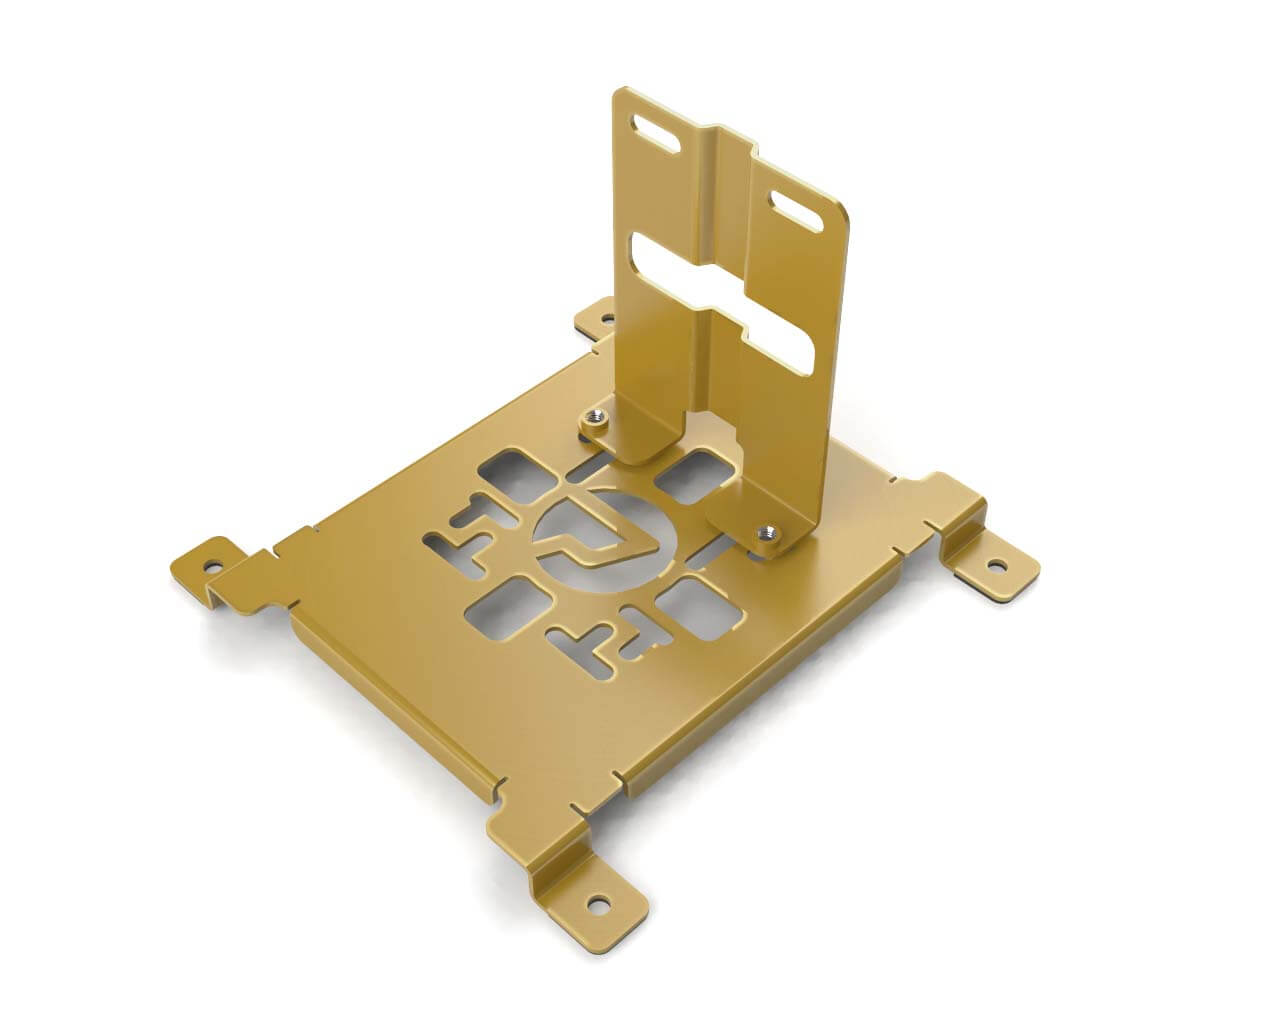 PrimoChill SX CTR2 Spider Mount Bracket Kit - 140mm Series - PrimoChill - KEEPING IT COOL Candy Gold